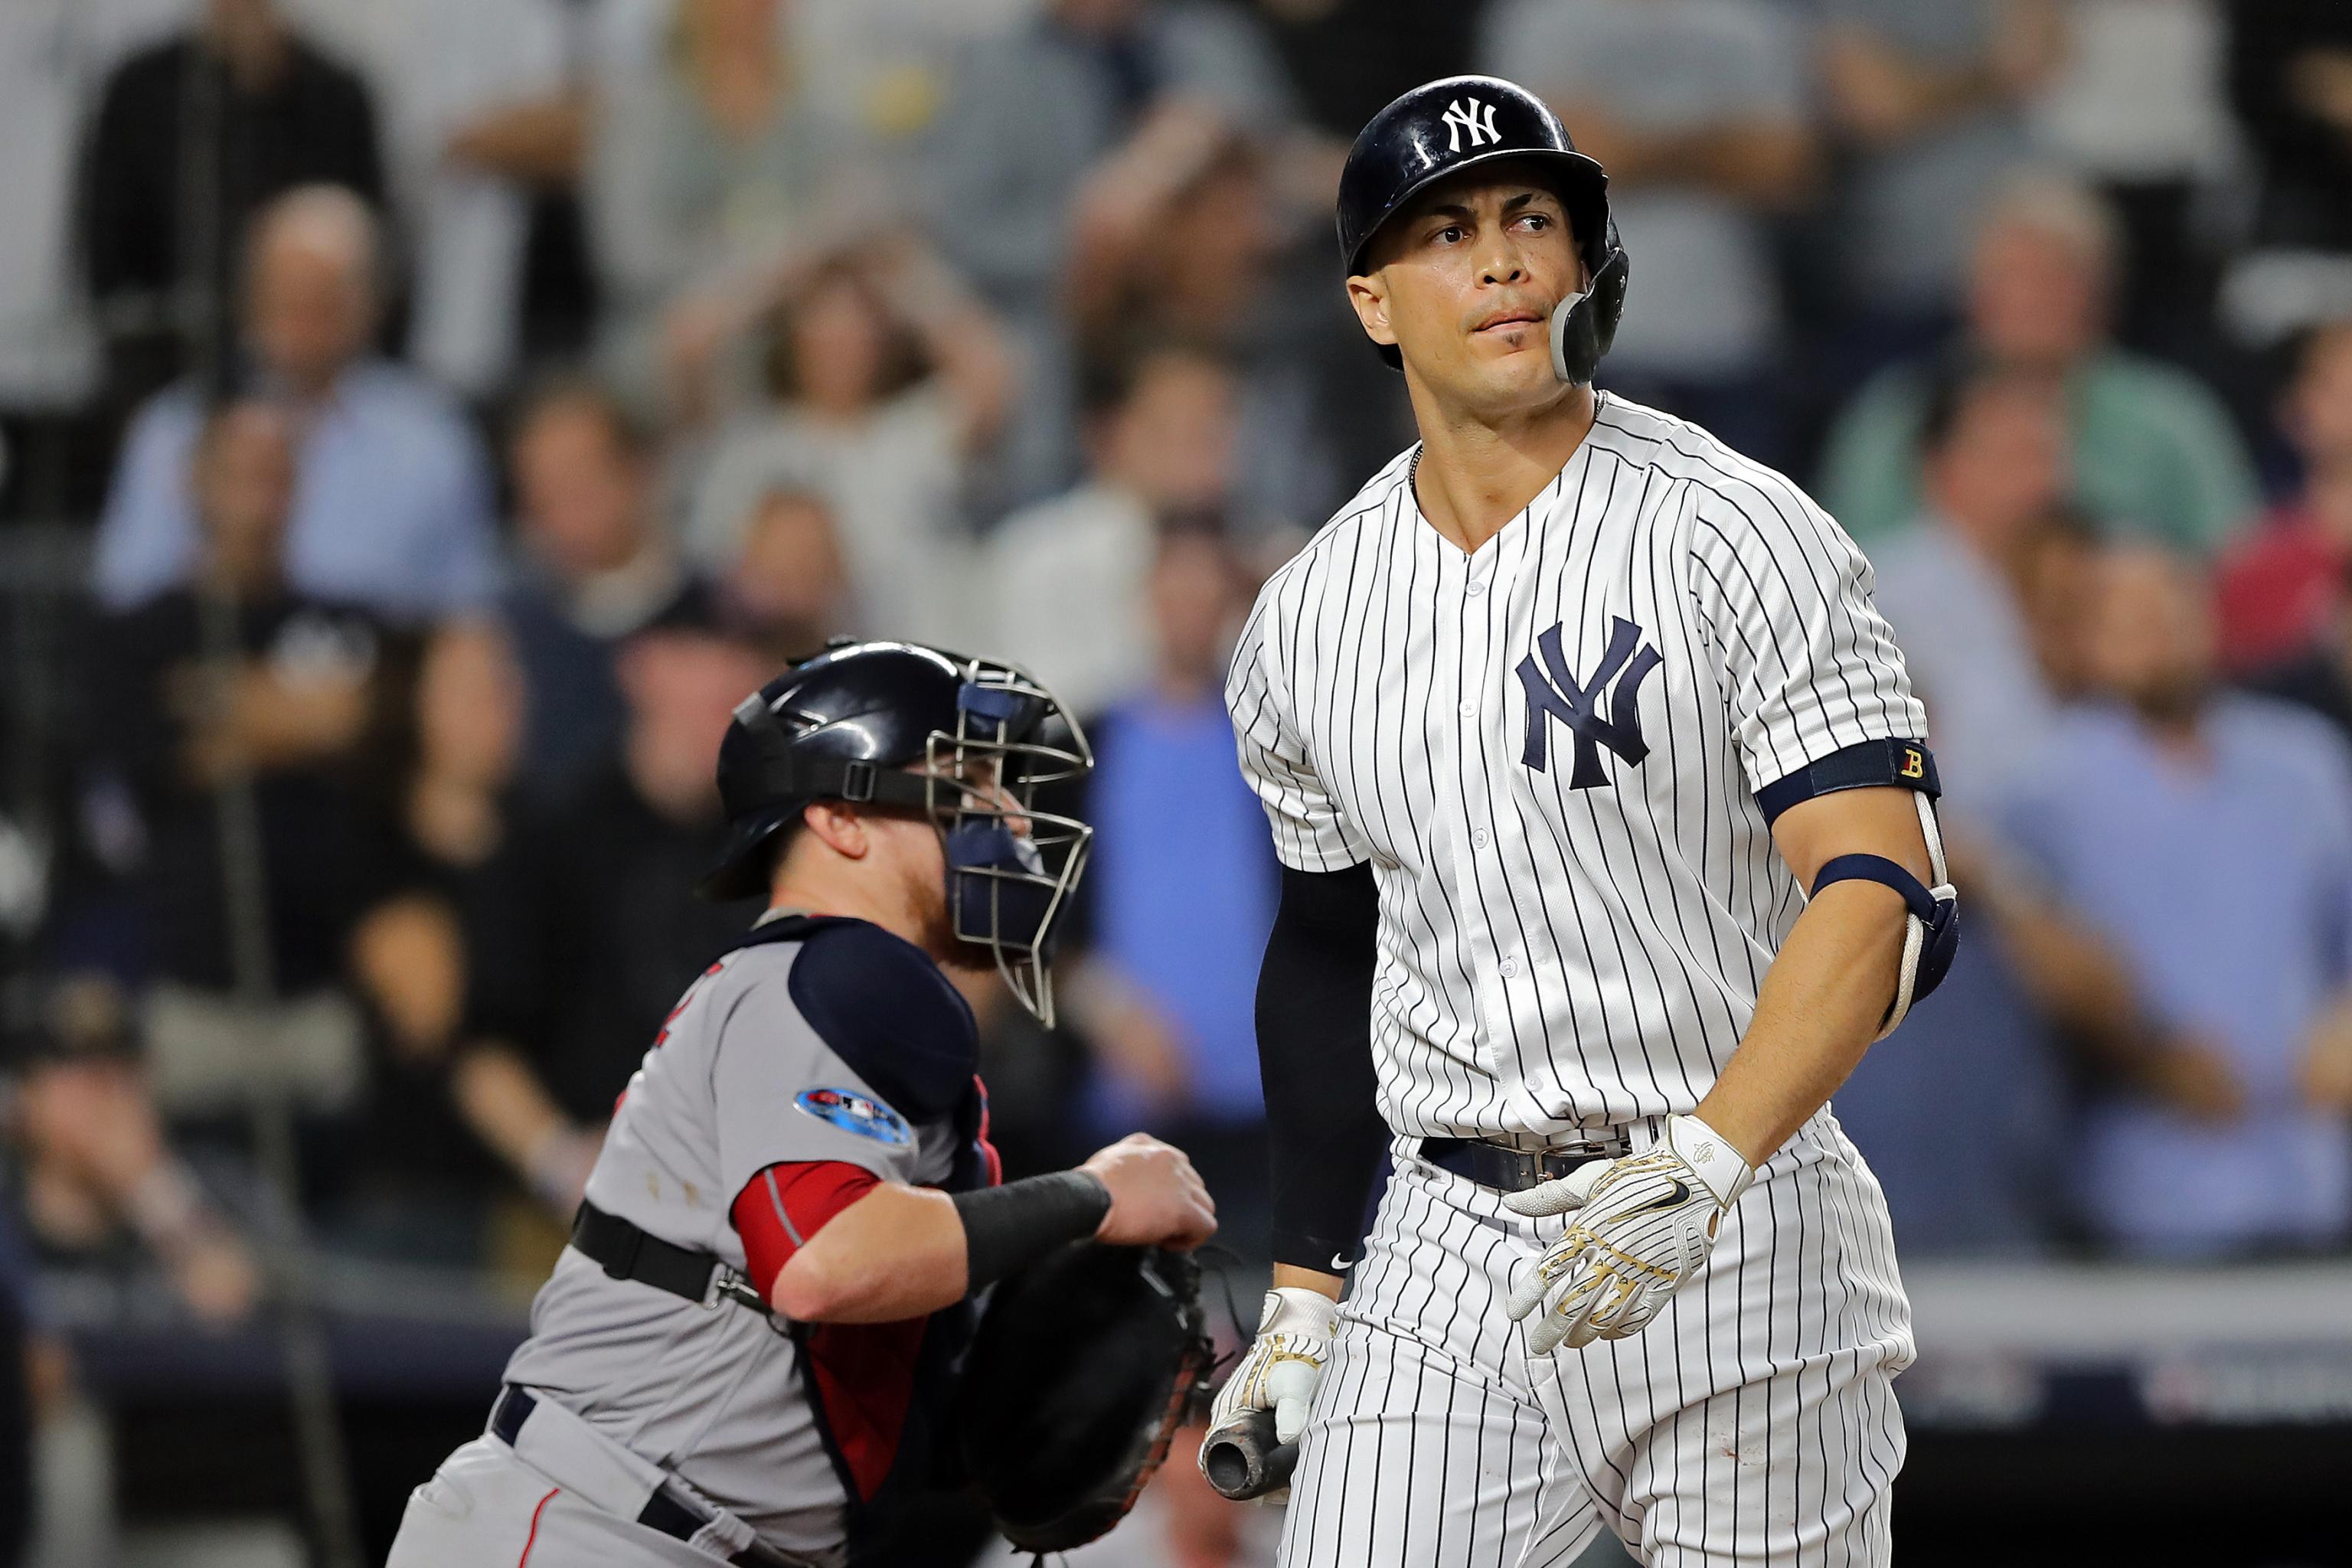 Giancarlo Stanton's home run leaves Yankees fans in awe after